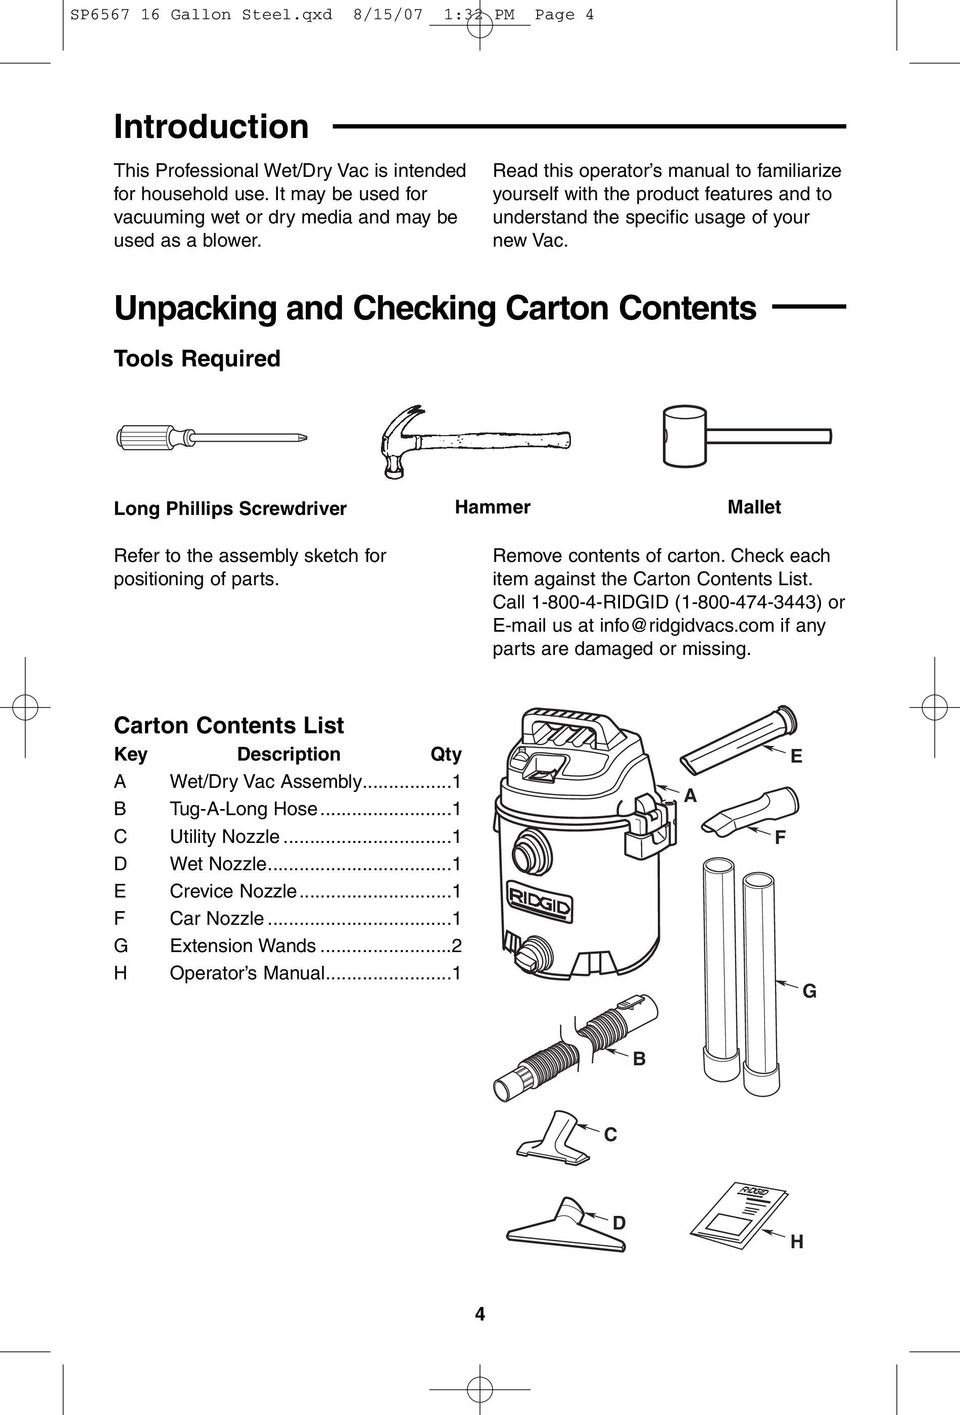 Unpacking and Checking Carton Contents Tools Required Long Phillips Screwdriver Hammer Mallet Refer to the assembly sketch for positioning of parts. Remove contents of carton.